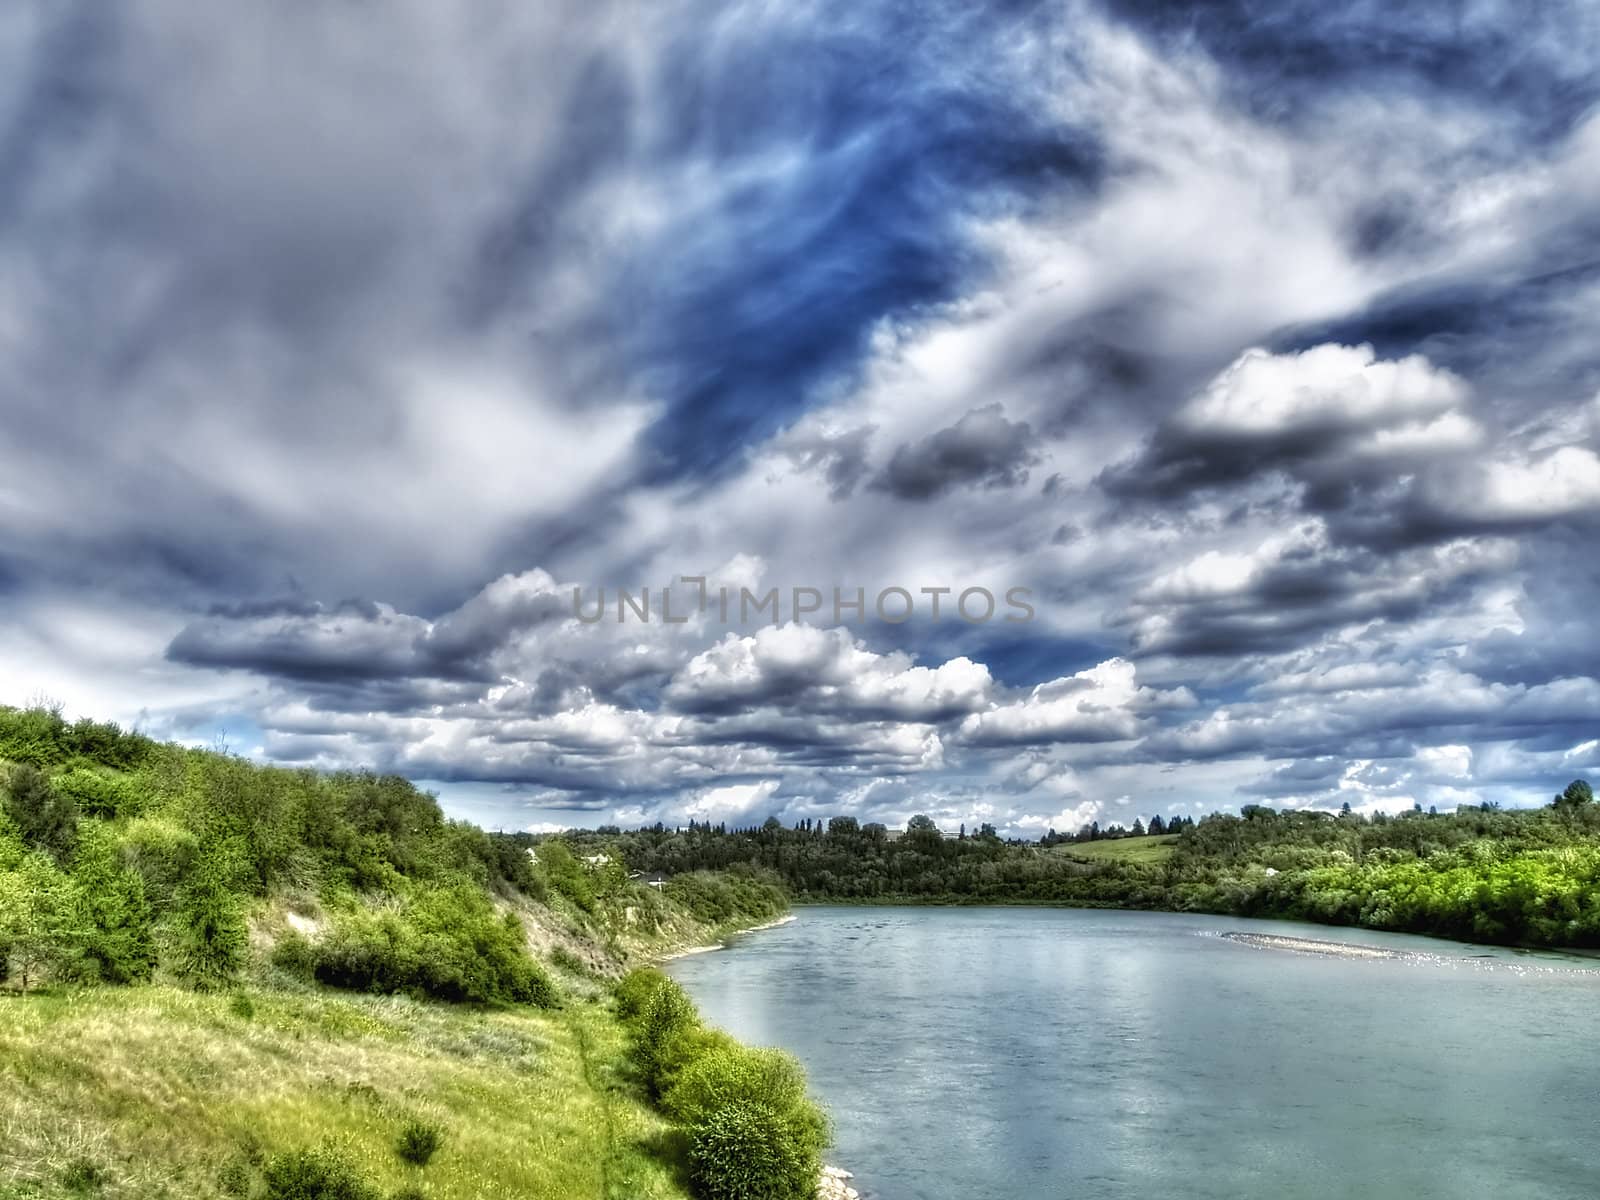 River and skyscape in mid summer.